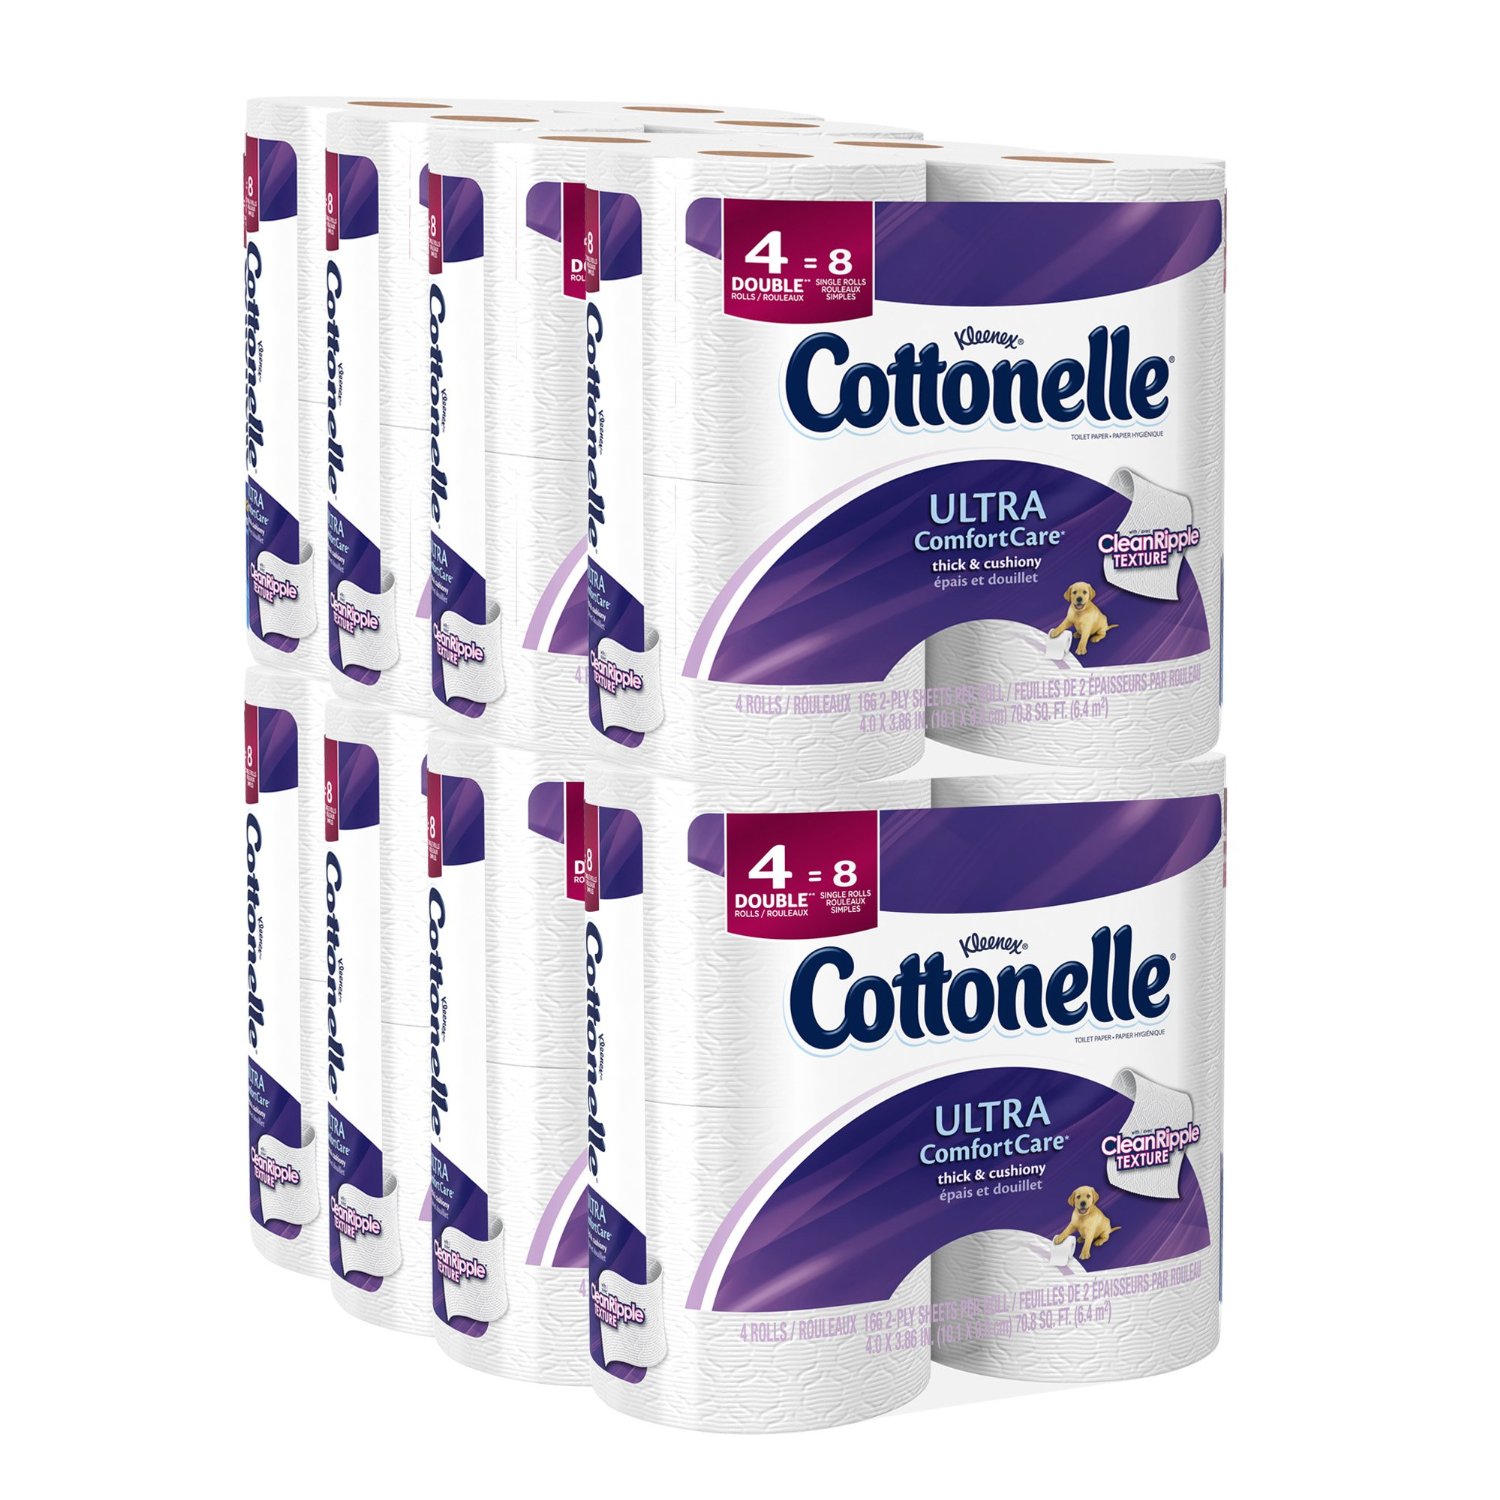 Cottonelle Ultra Comfort Care Toilet Paper STOCK UP Deal!